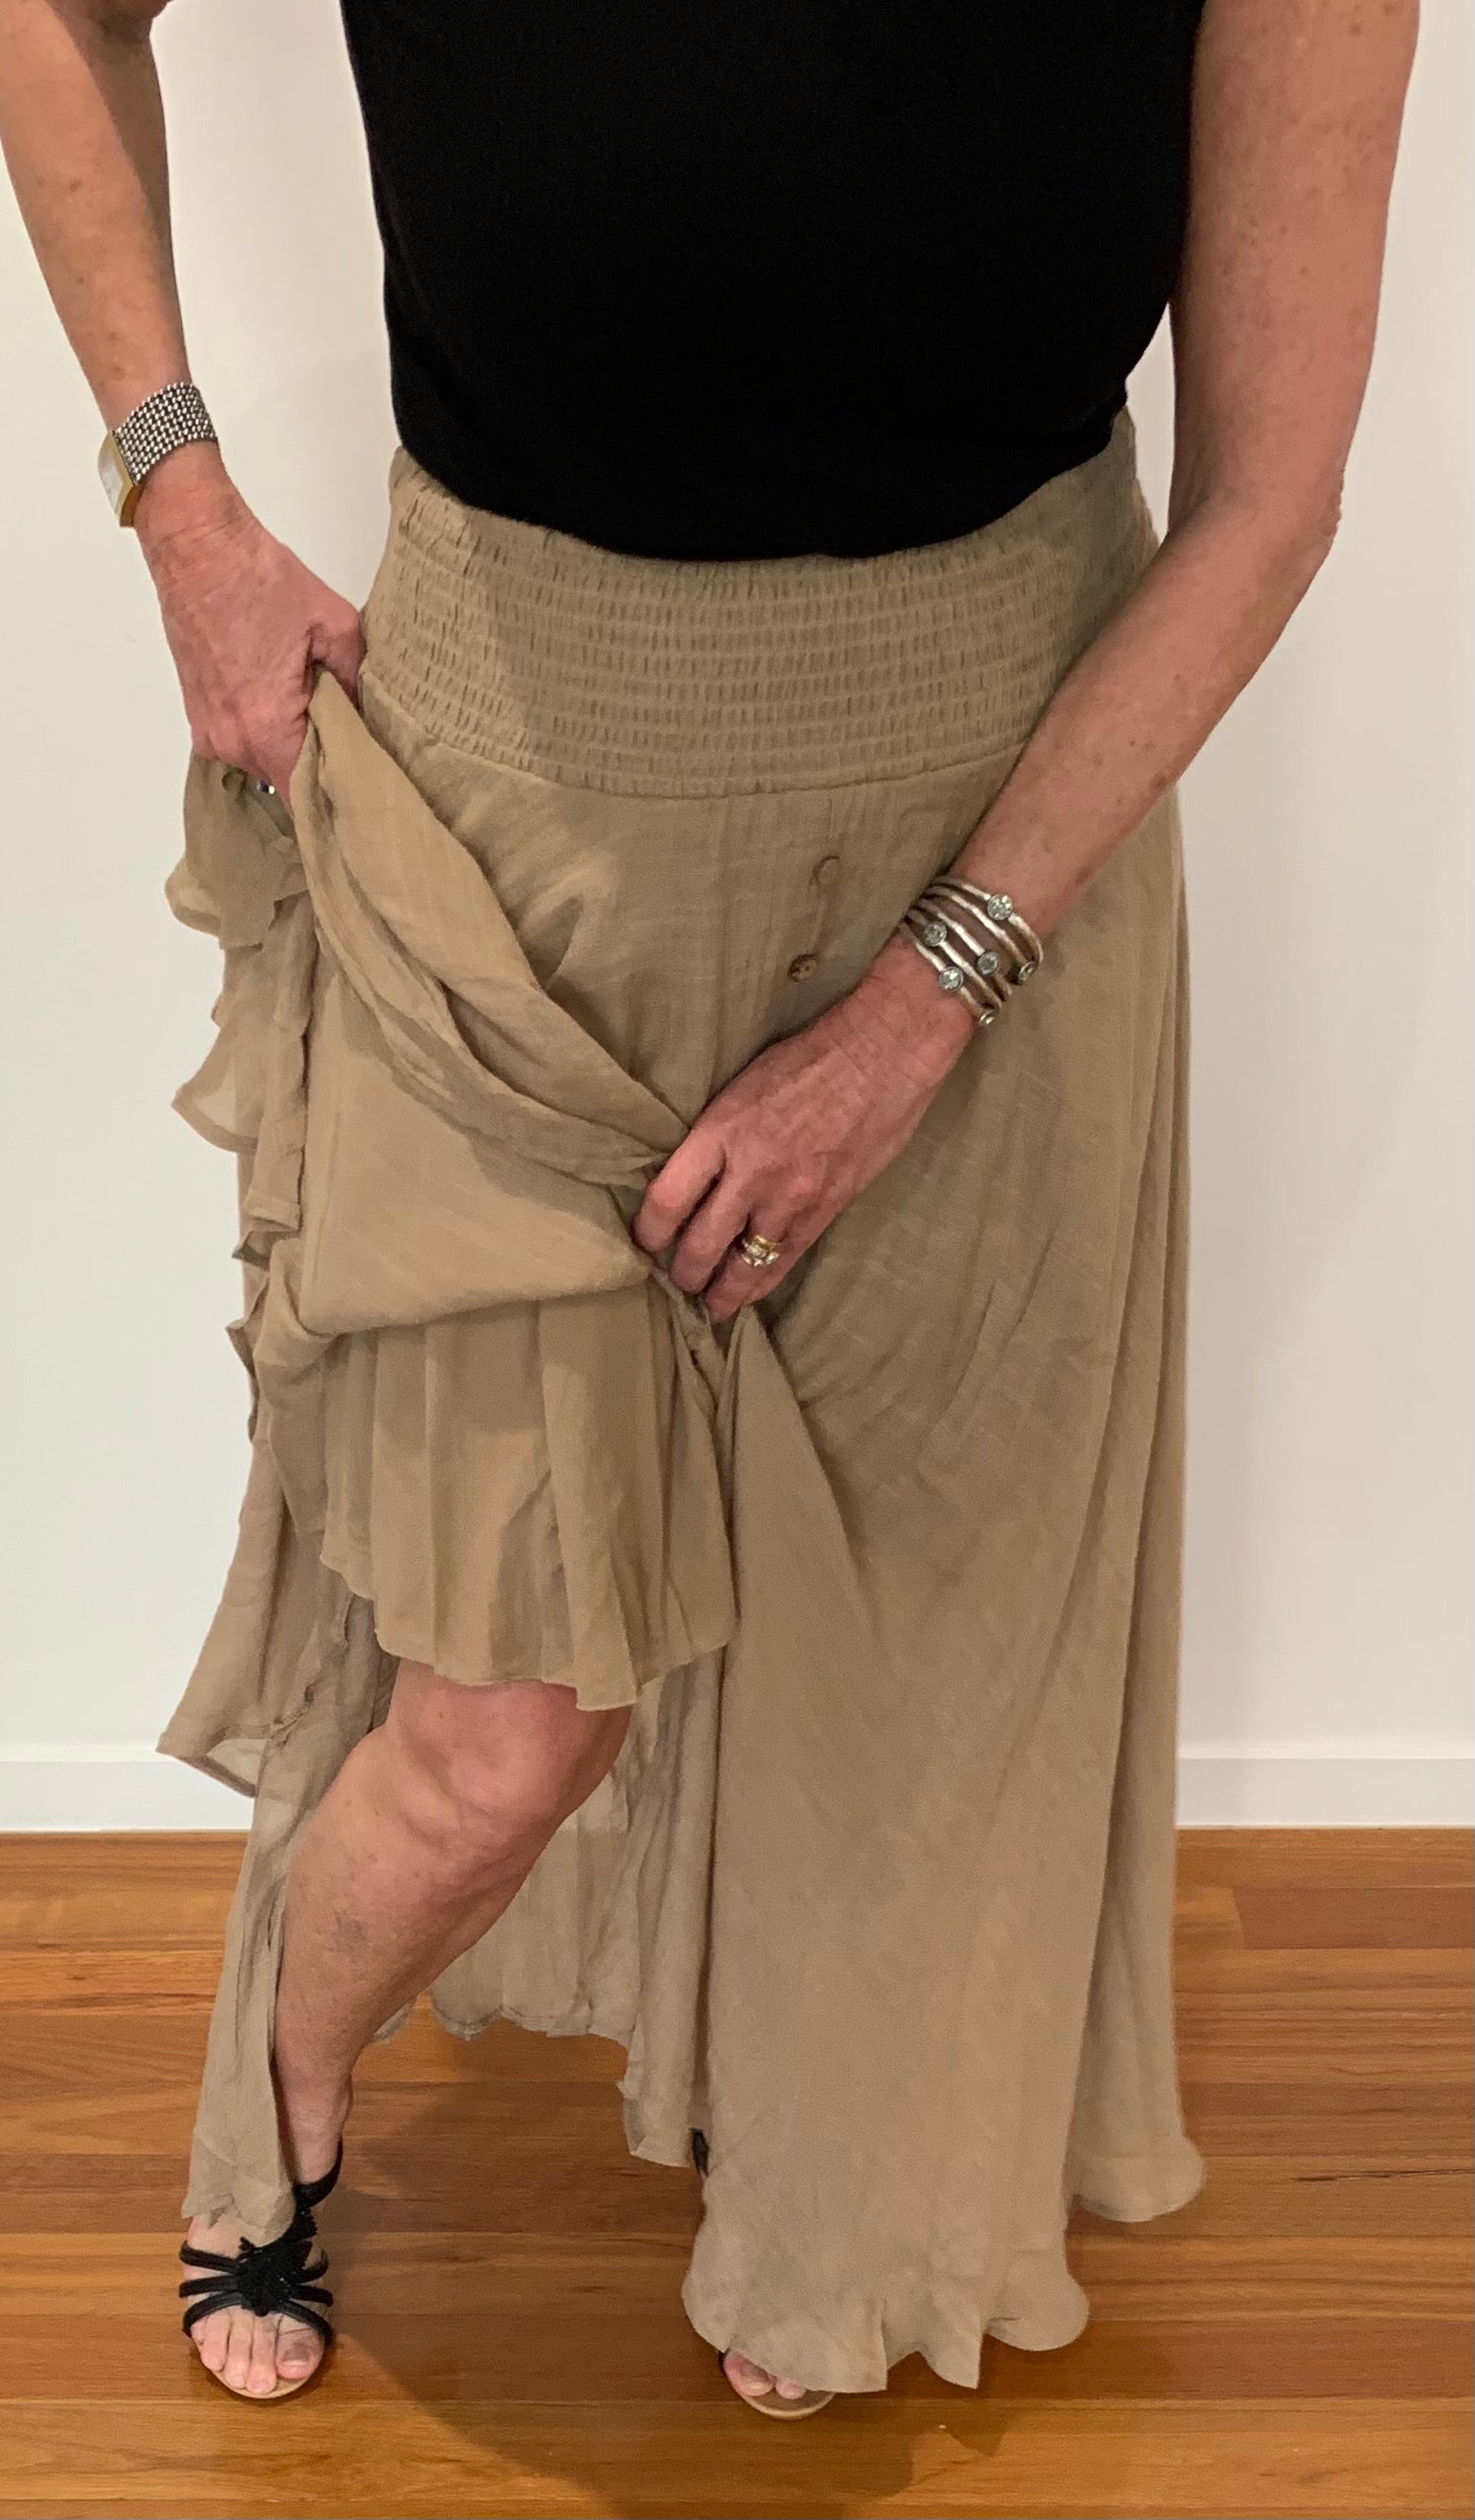 Maxi Skirt in Stunning Mocha Colour w Slit Lining & Button Front